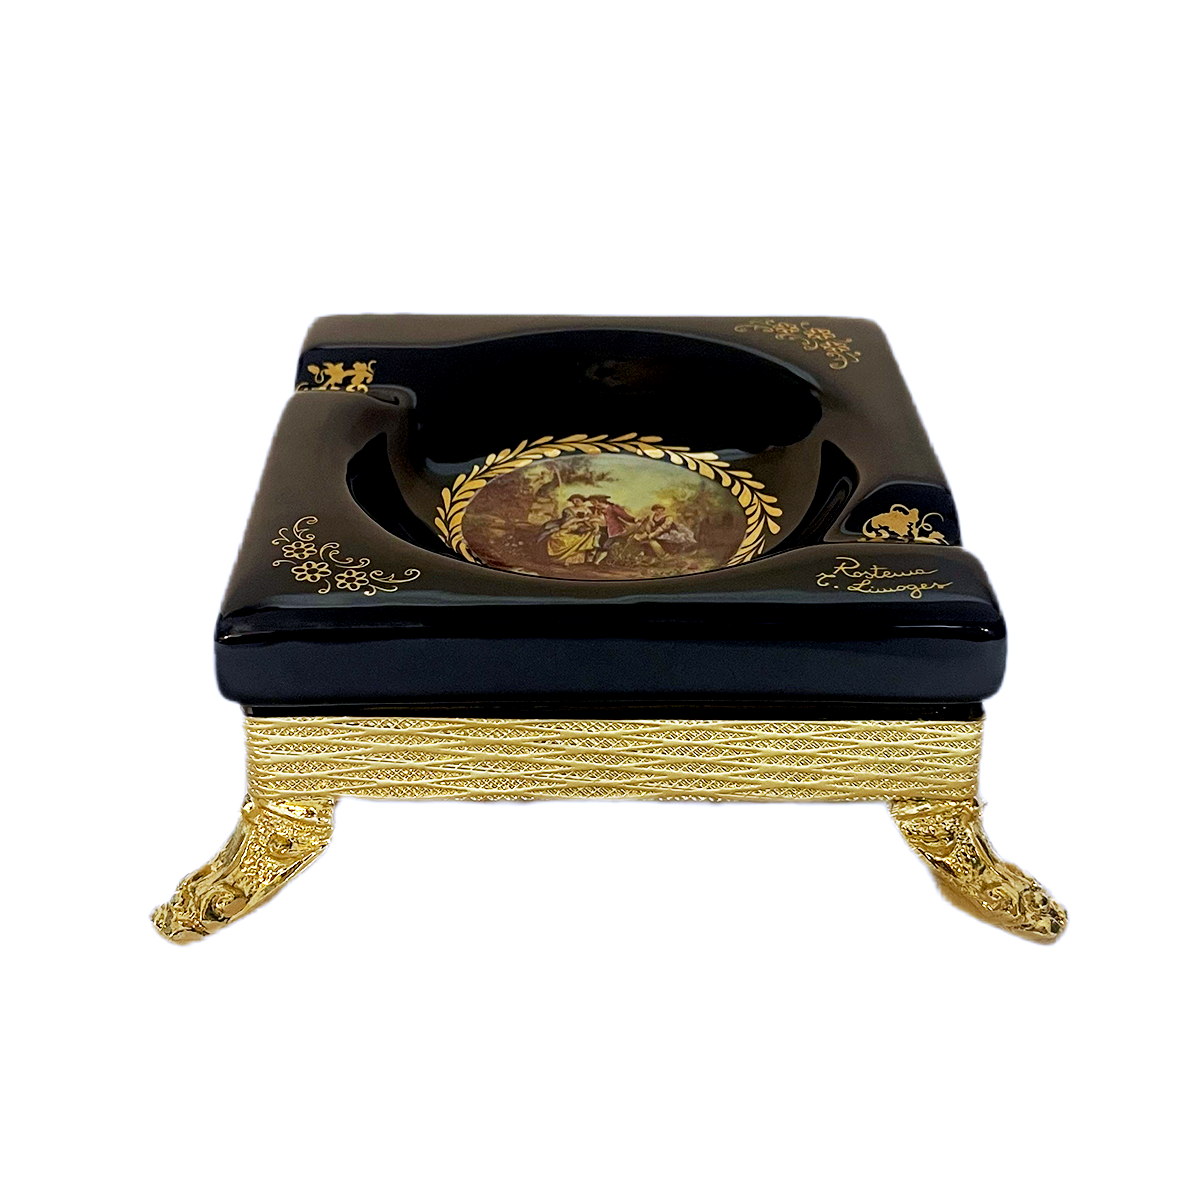 Limoge Rostema Square Ashtray with Gold Plated Legs -Romeo & Juliet -Cobalt Blue & Gold -13x13x5 cm